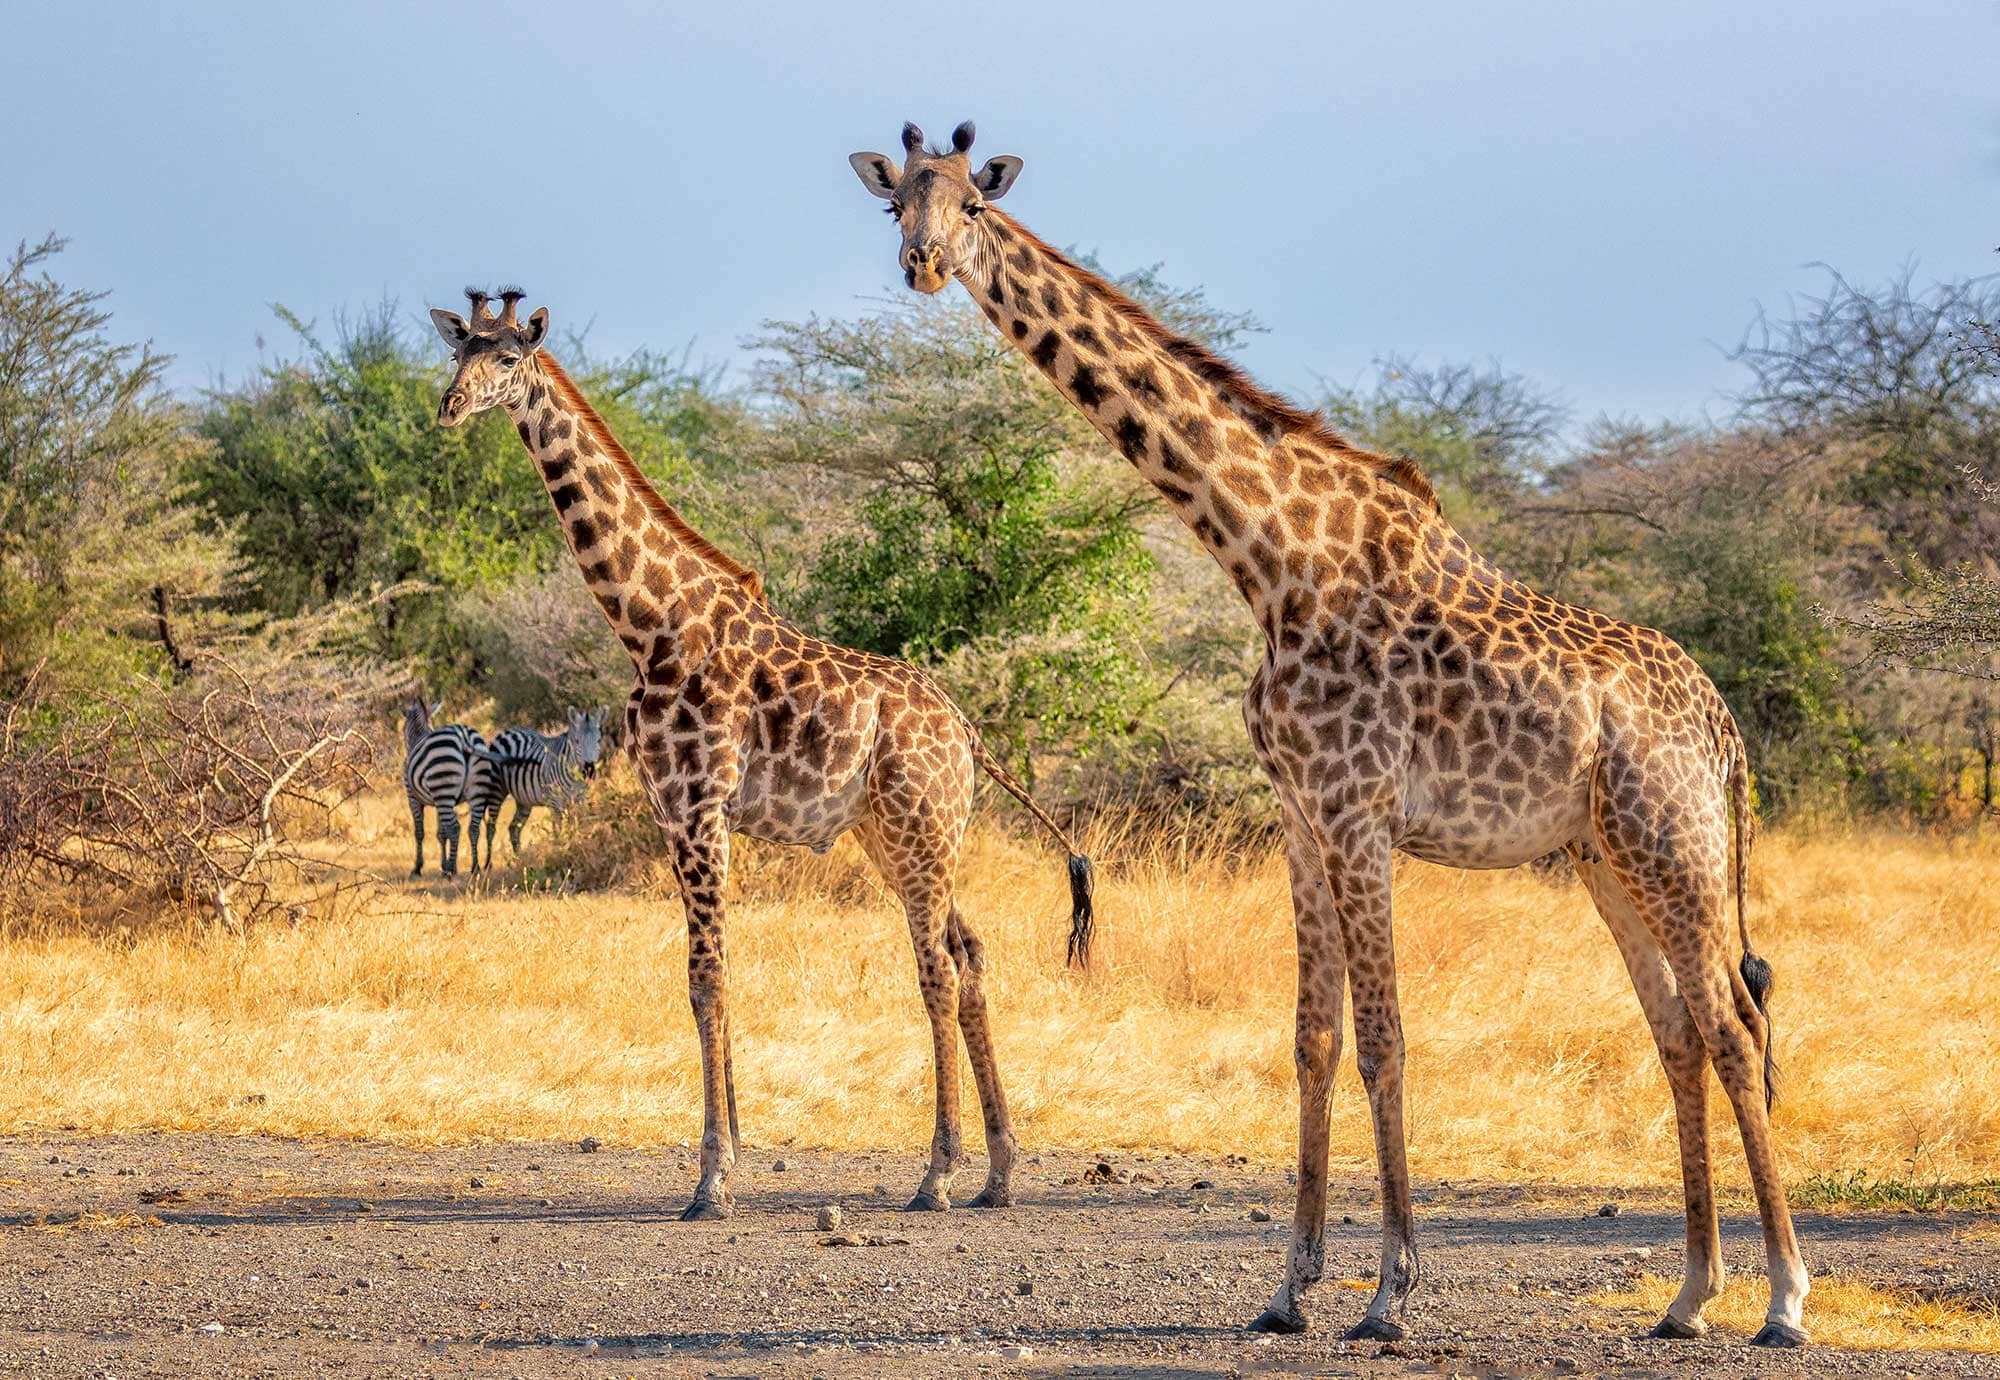 Two giraffes look over towards the viewer